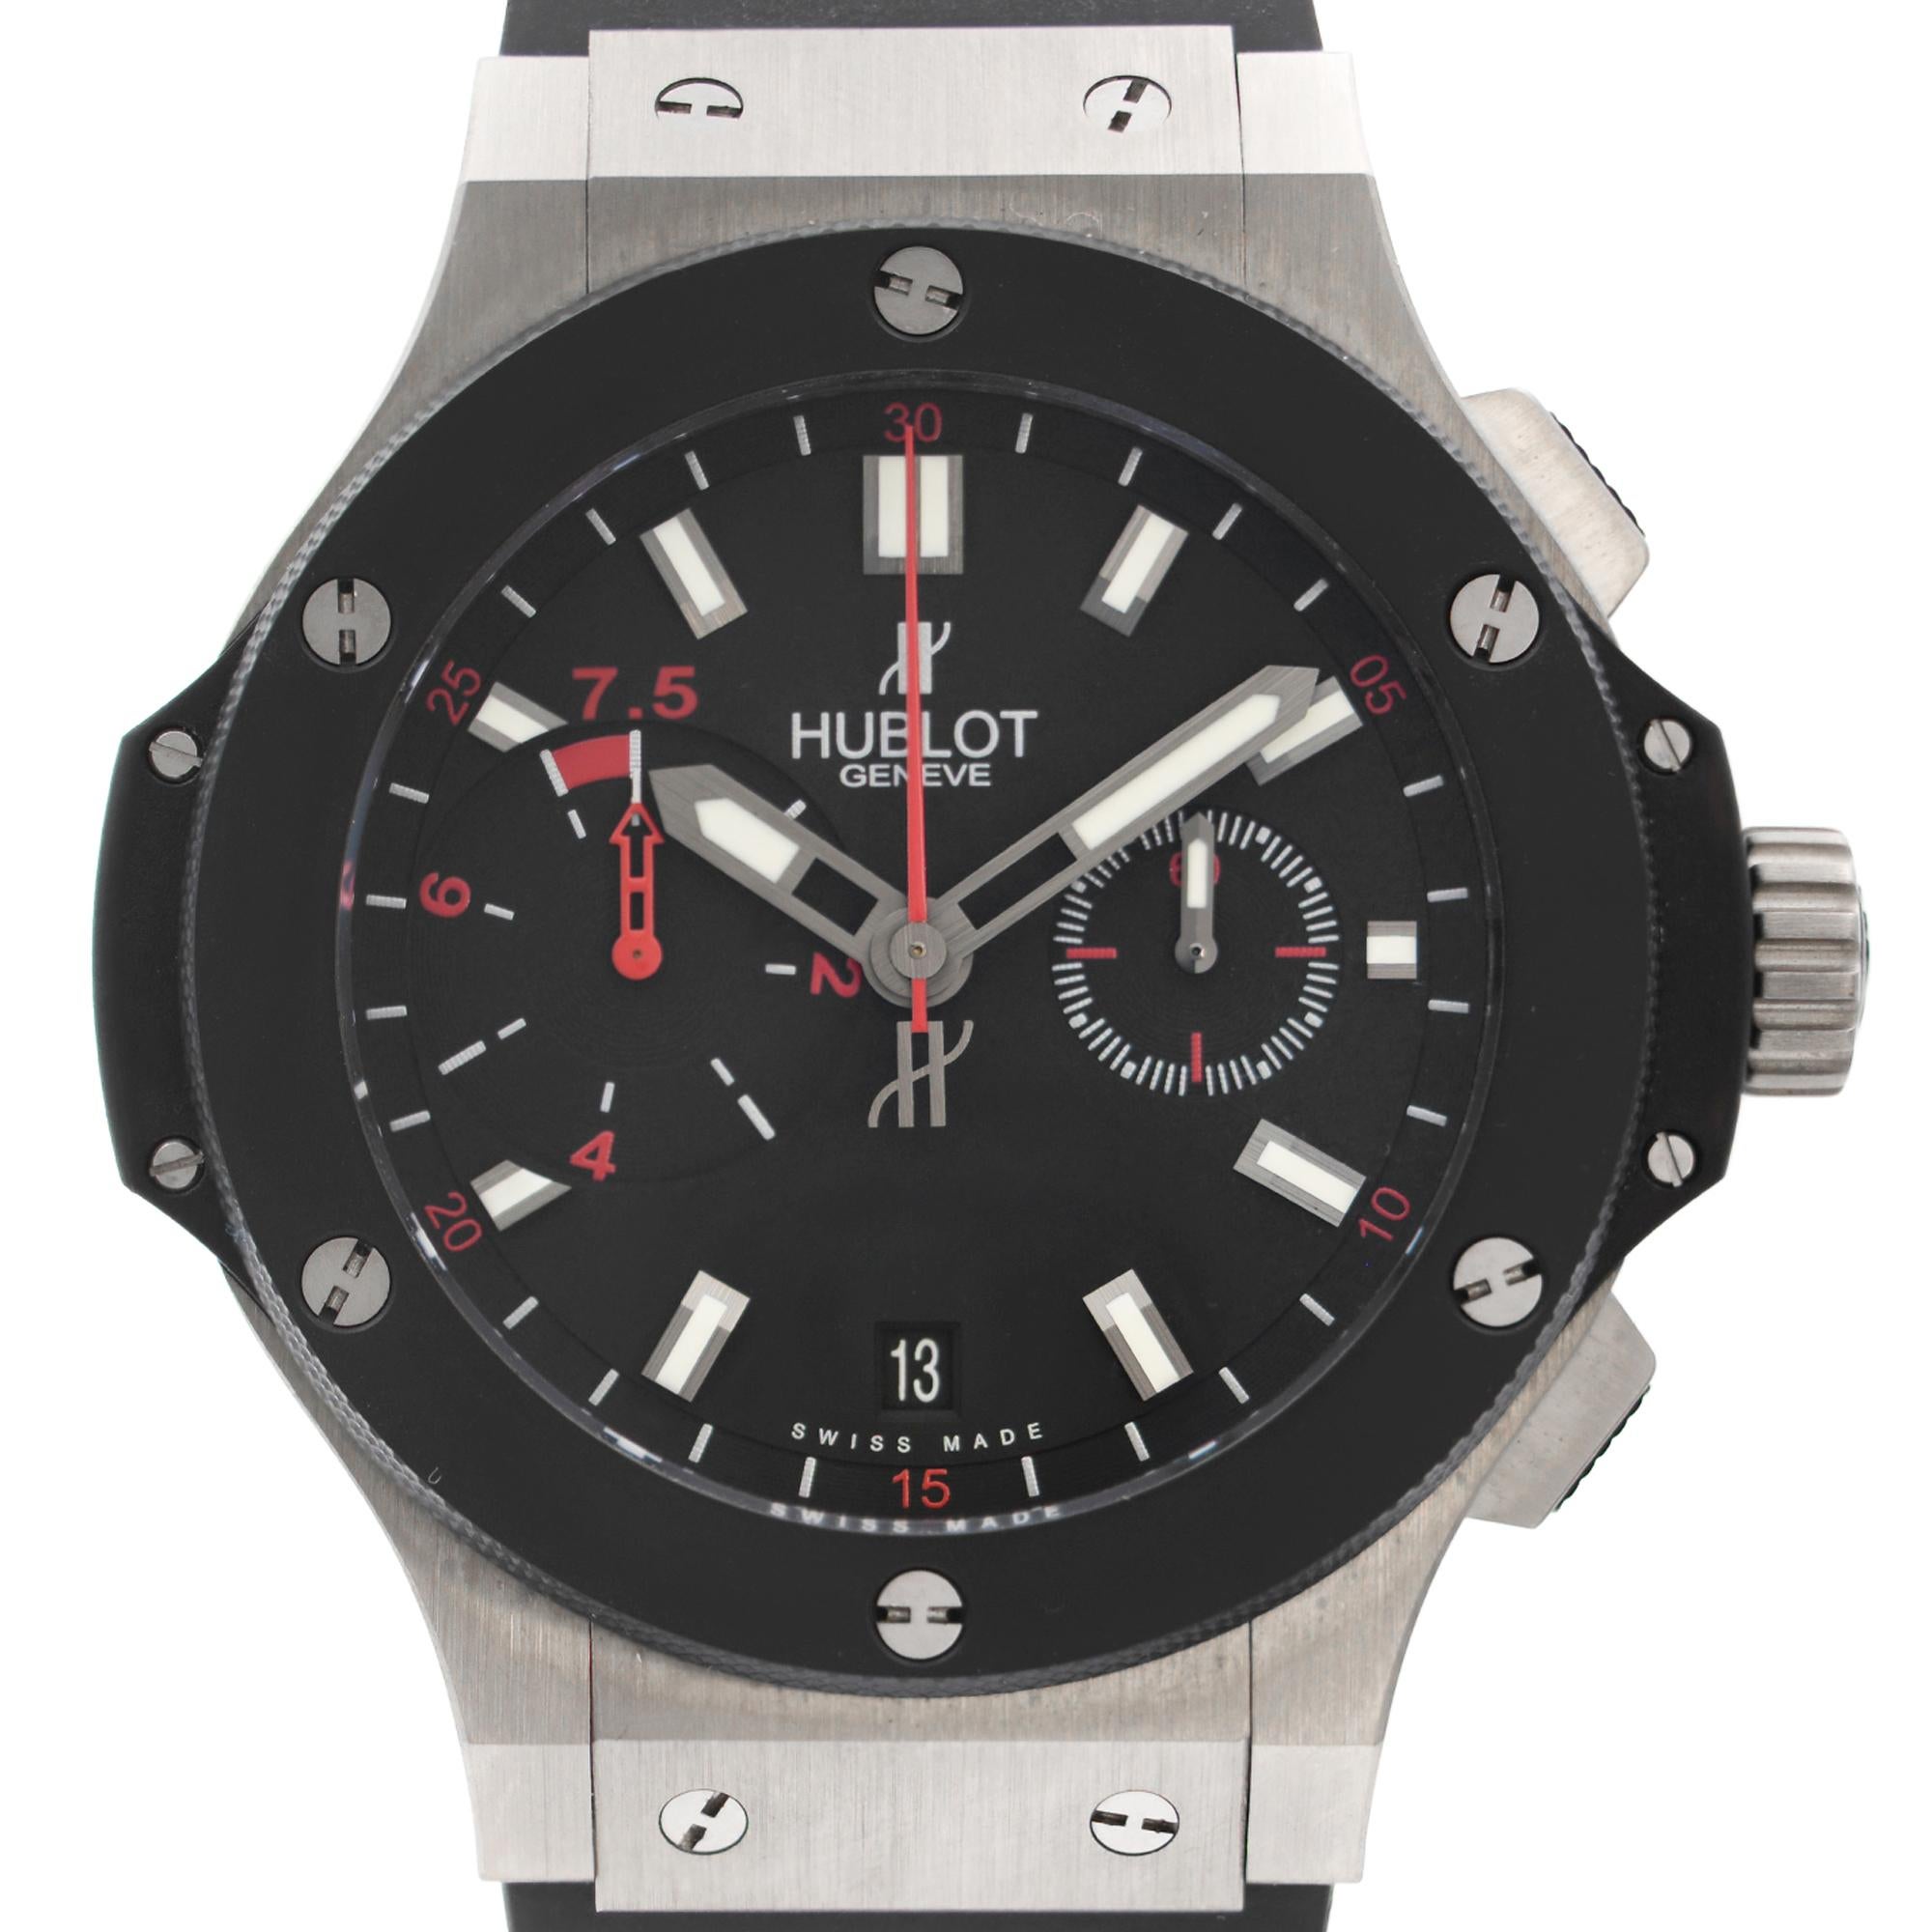 Display Model Hublot Chukker Bang Limited Edition to 500 Black Dial Titanium Automatic Mens Watch. Comes with an extra brown leather strap. Missing titanium Grid This Beautiful Timepiece Features: Titanium Case with a Black Rubber Band, Fixed Black